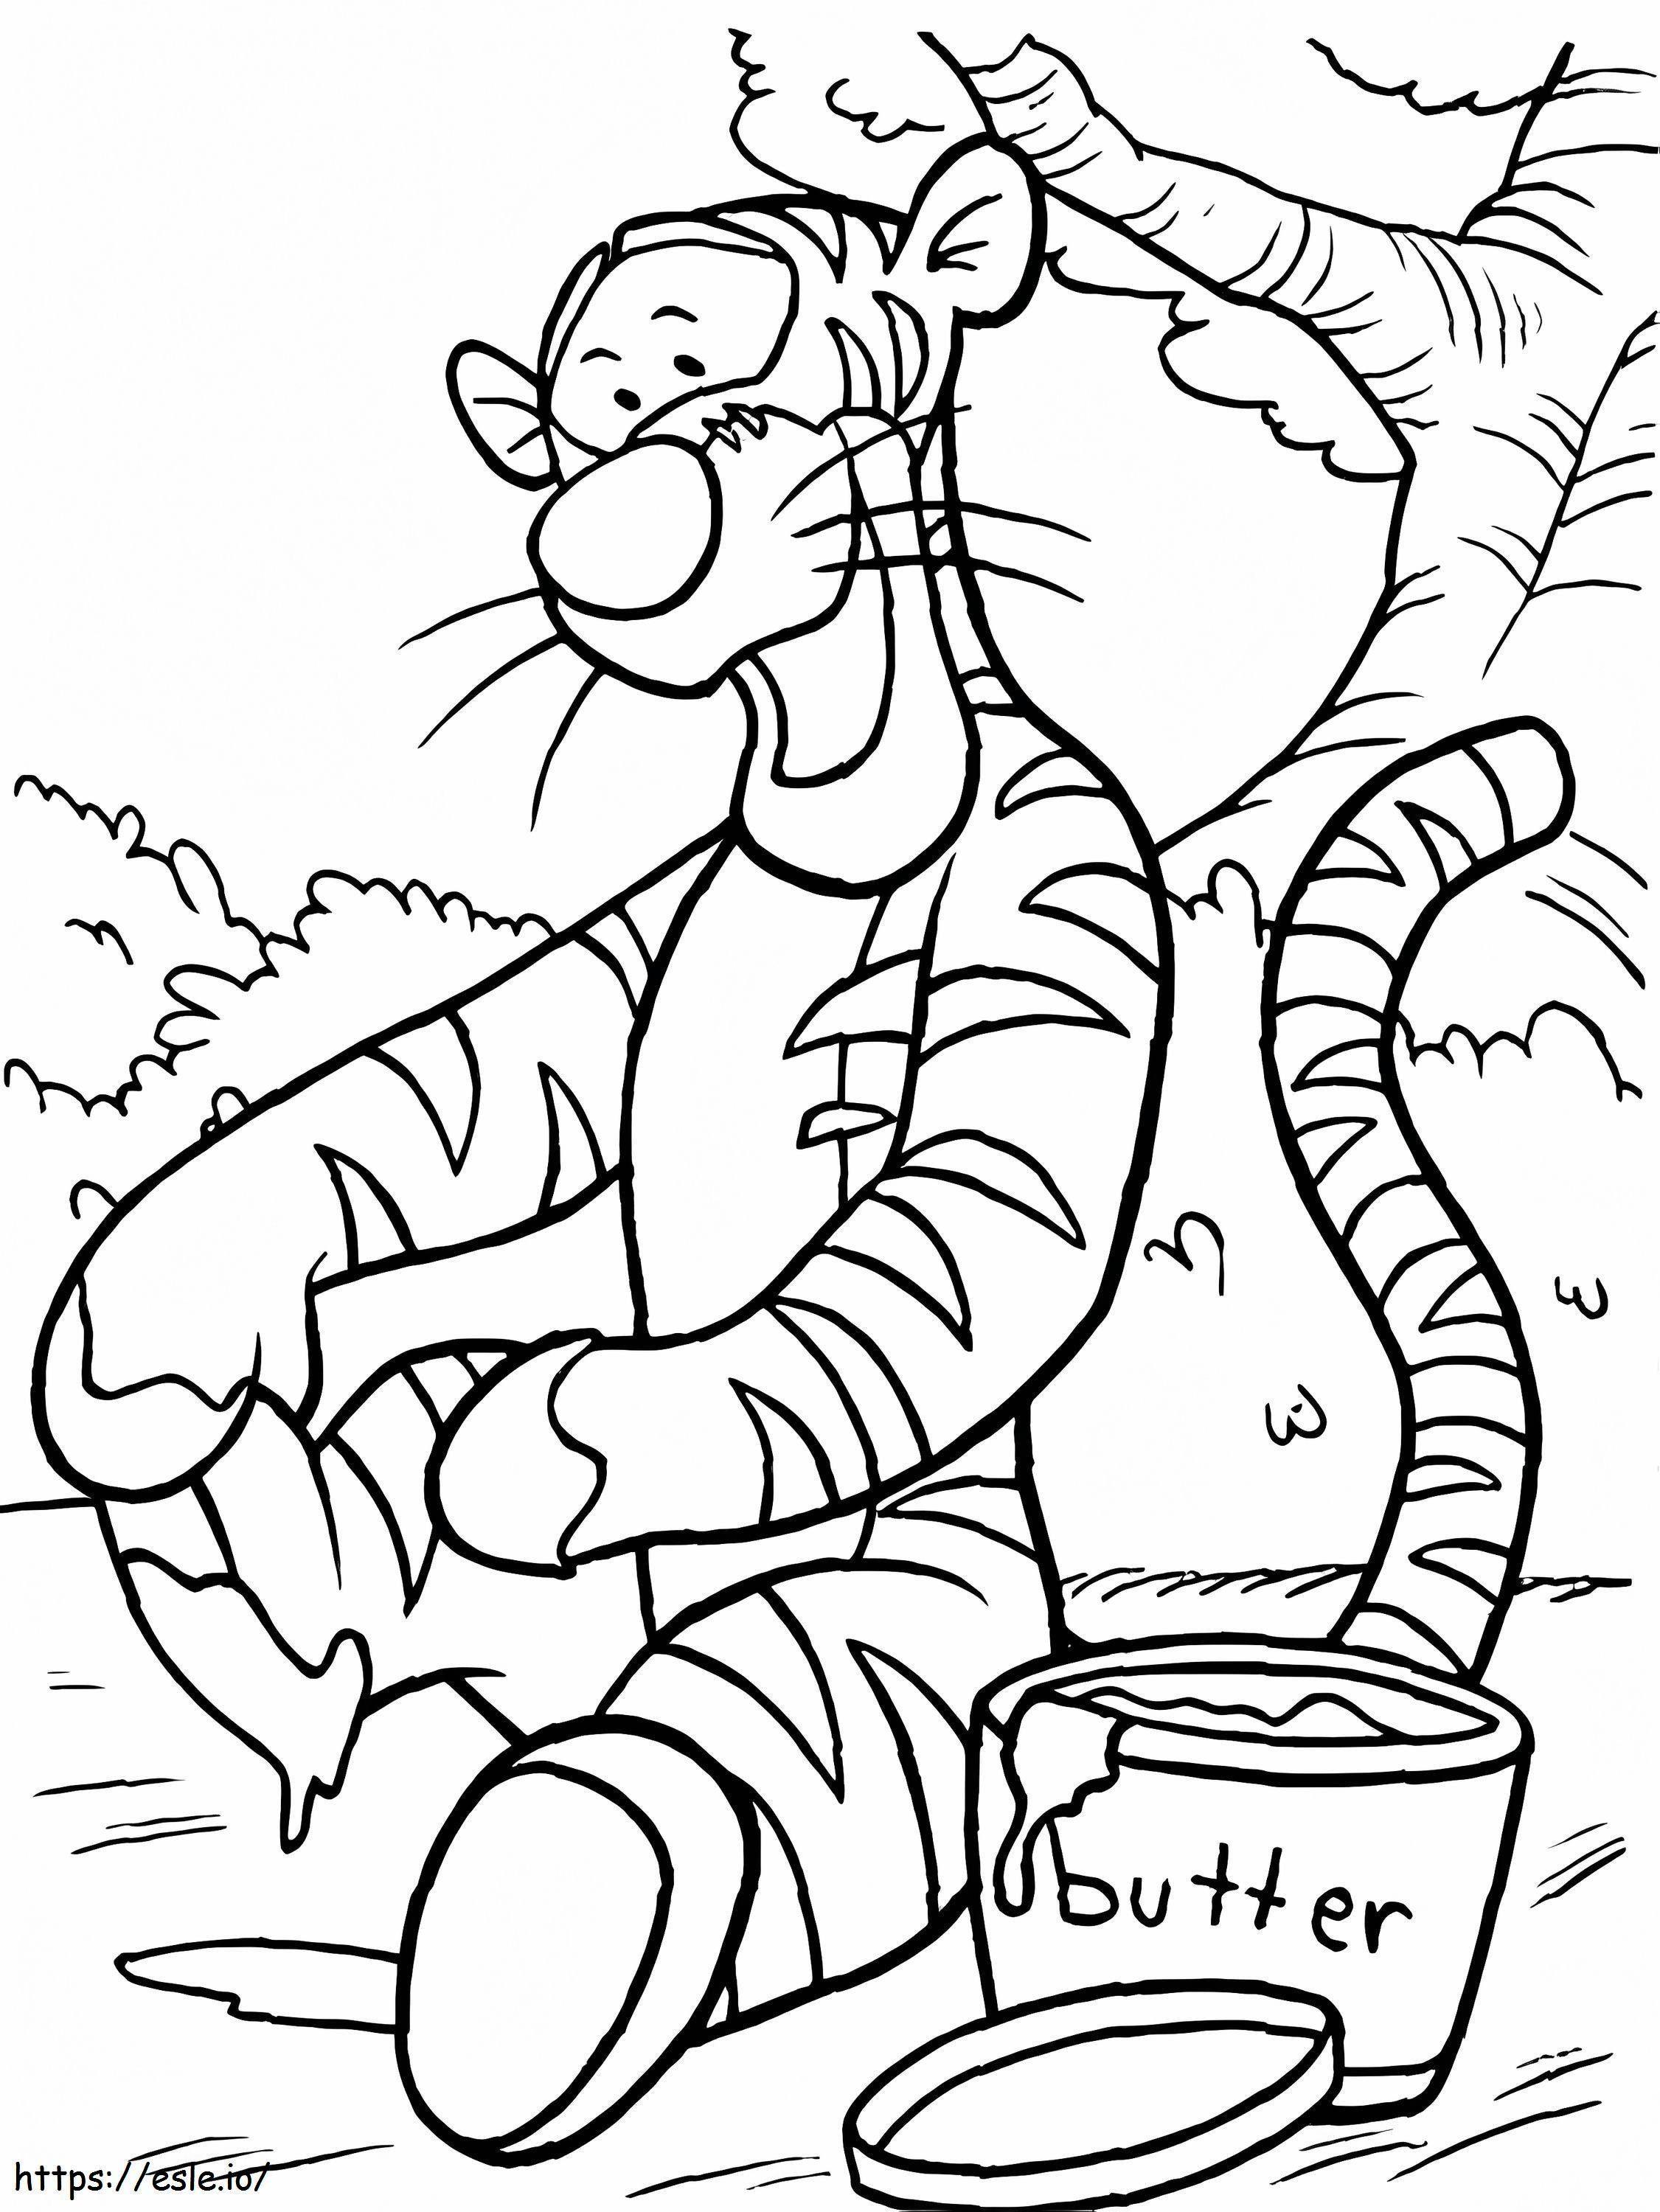 Tigger With Butter coloring page